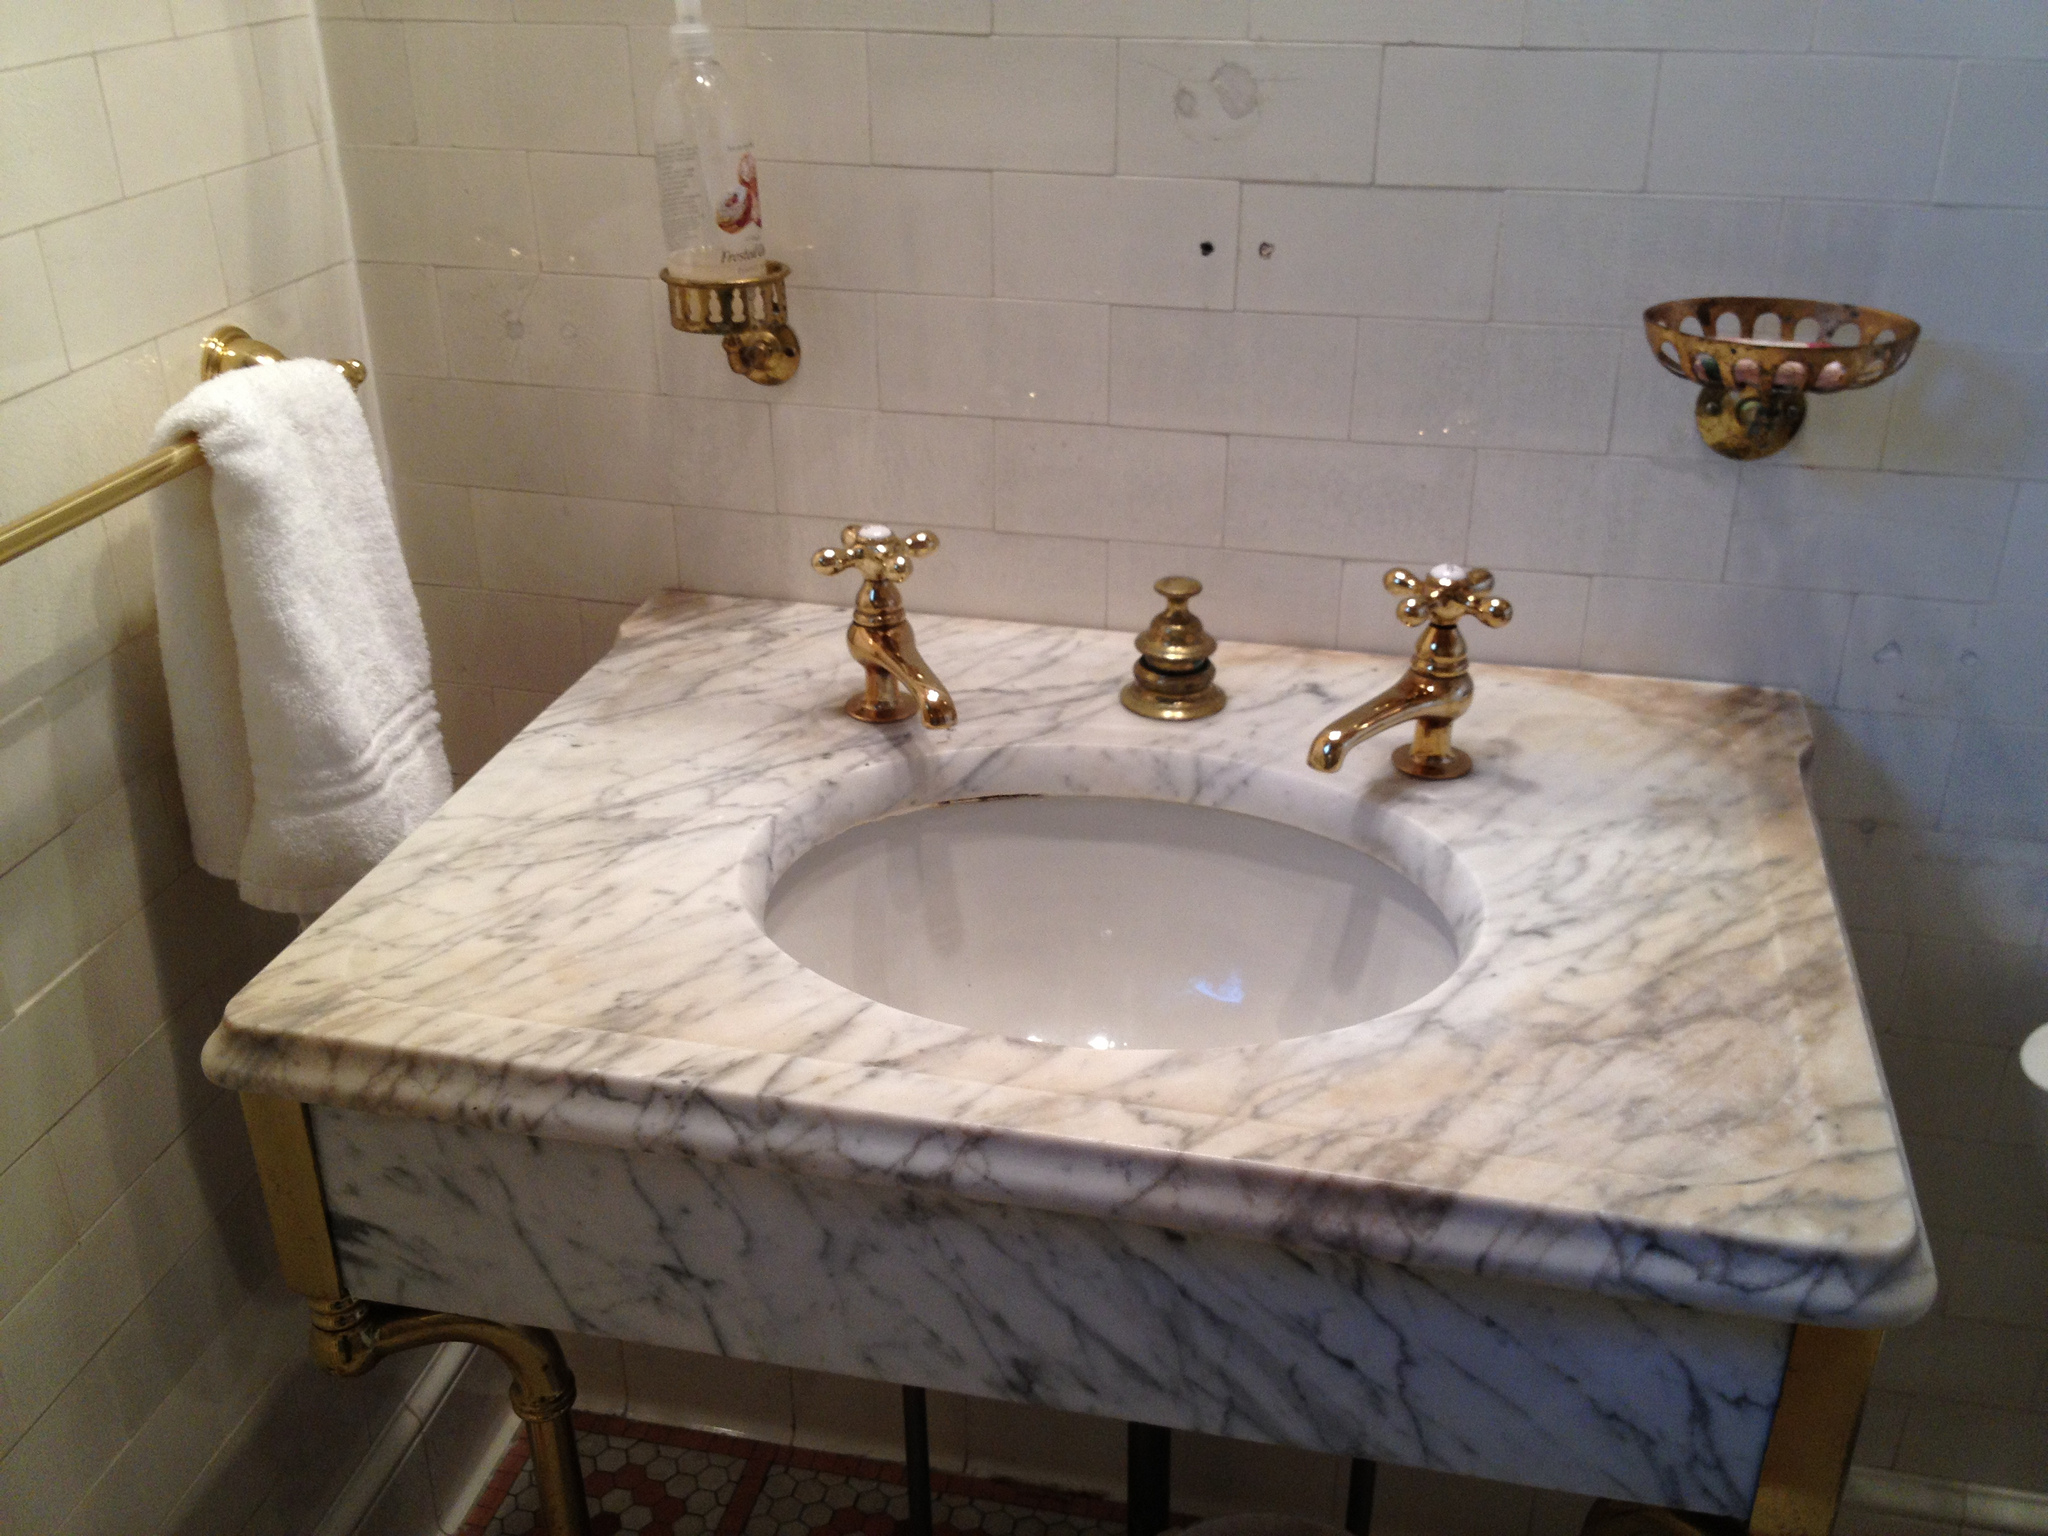 Replacing An Old Bathroom Sink is easier than it sounds ... photo by CC user lauraritchie on Flickr